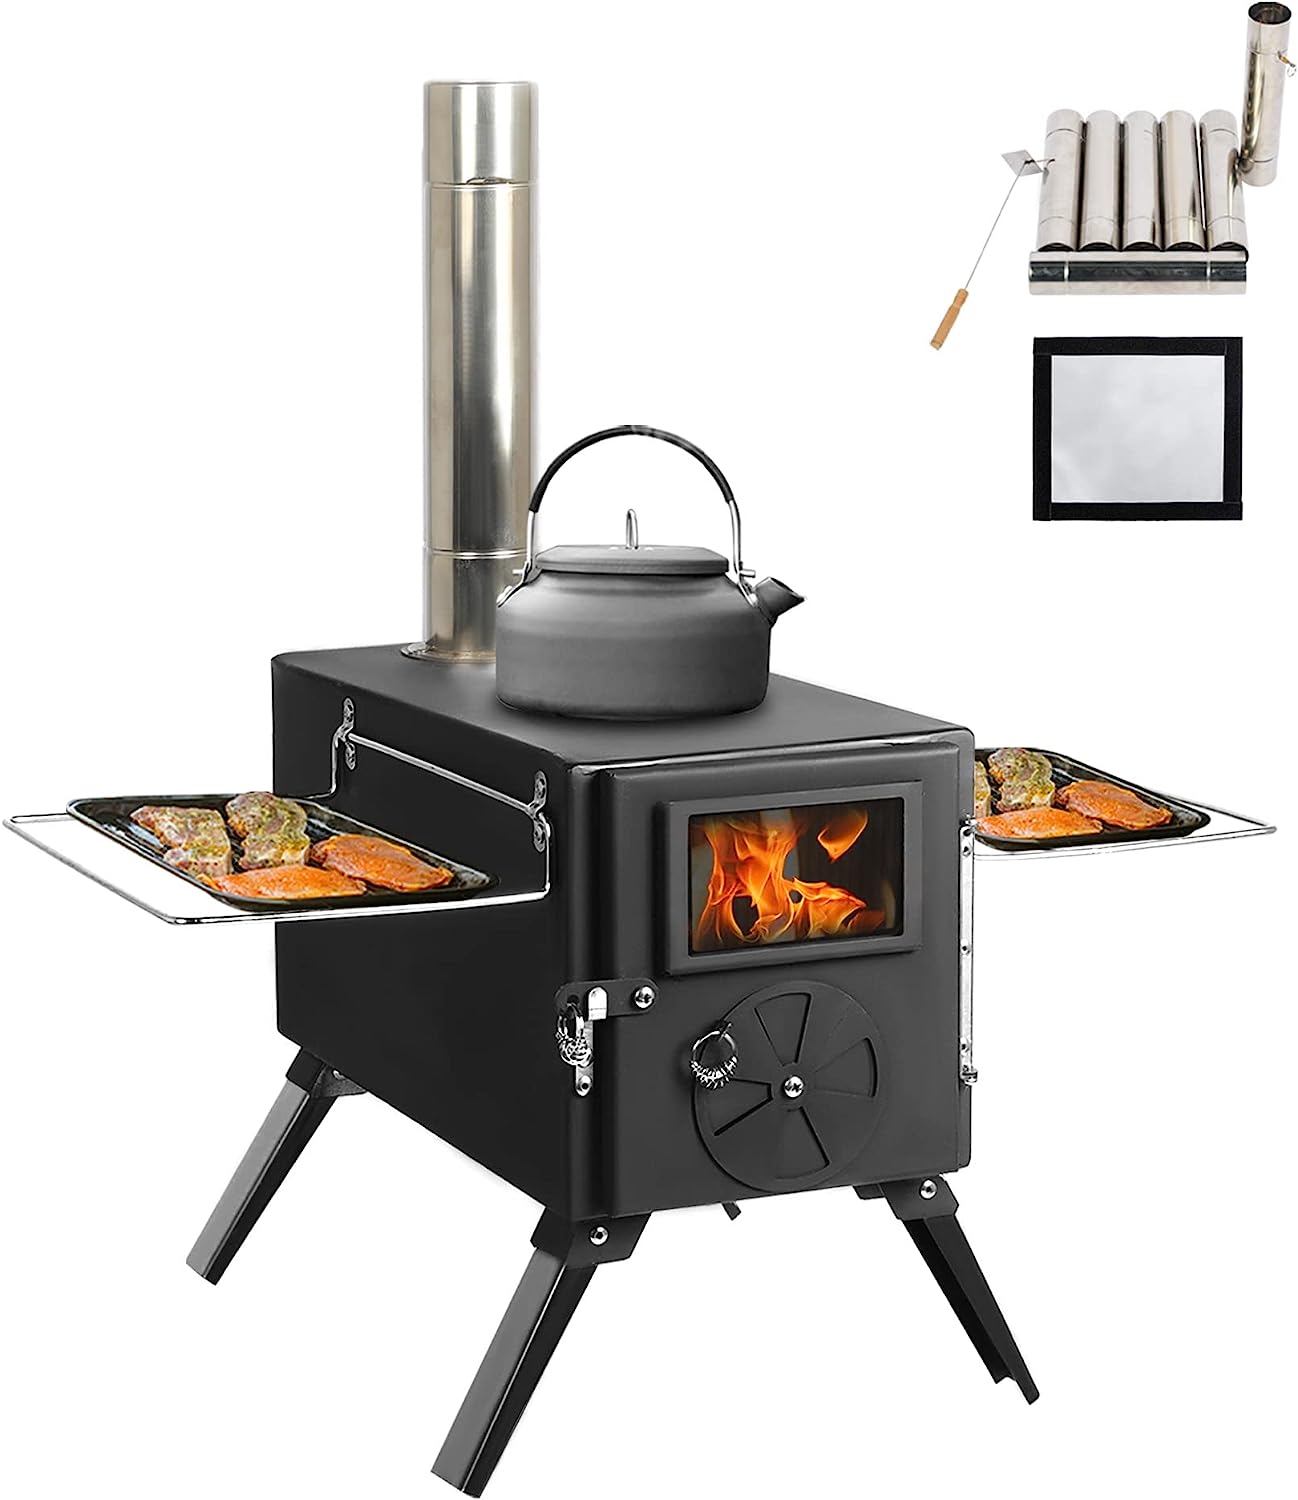 wood stove on the market detailed review